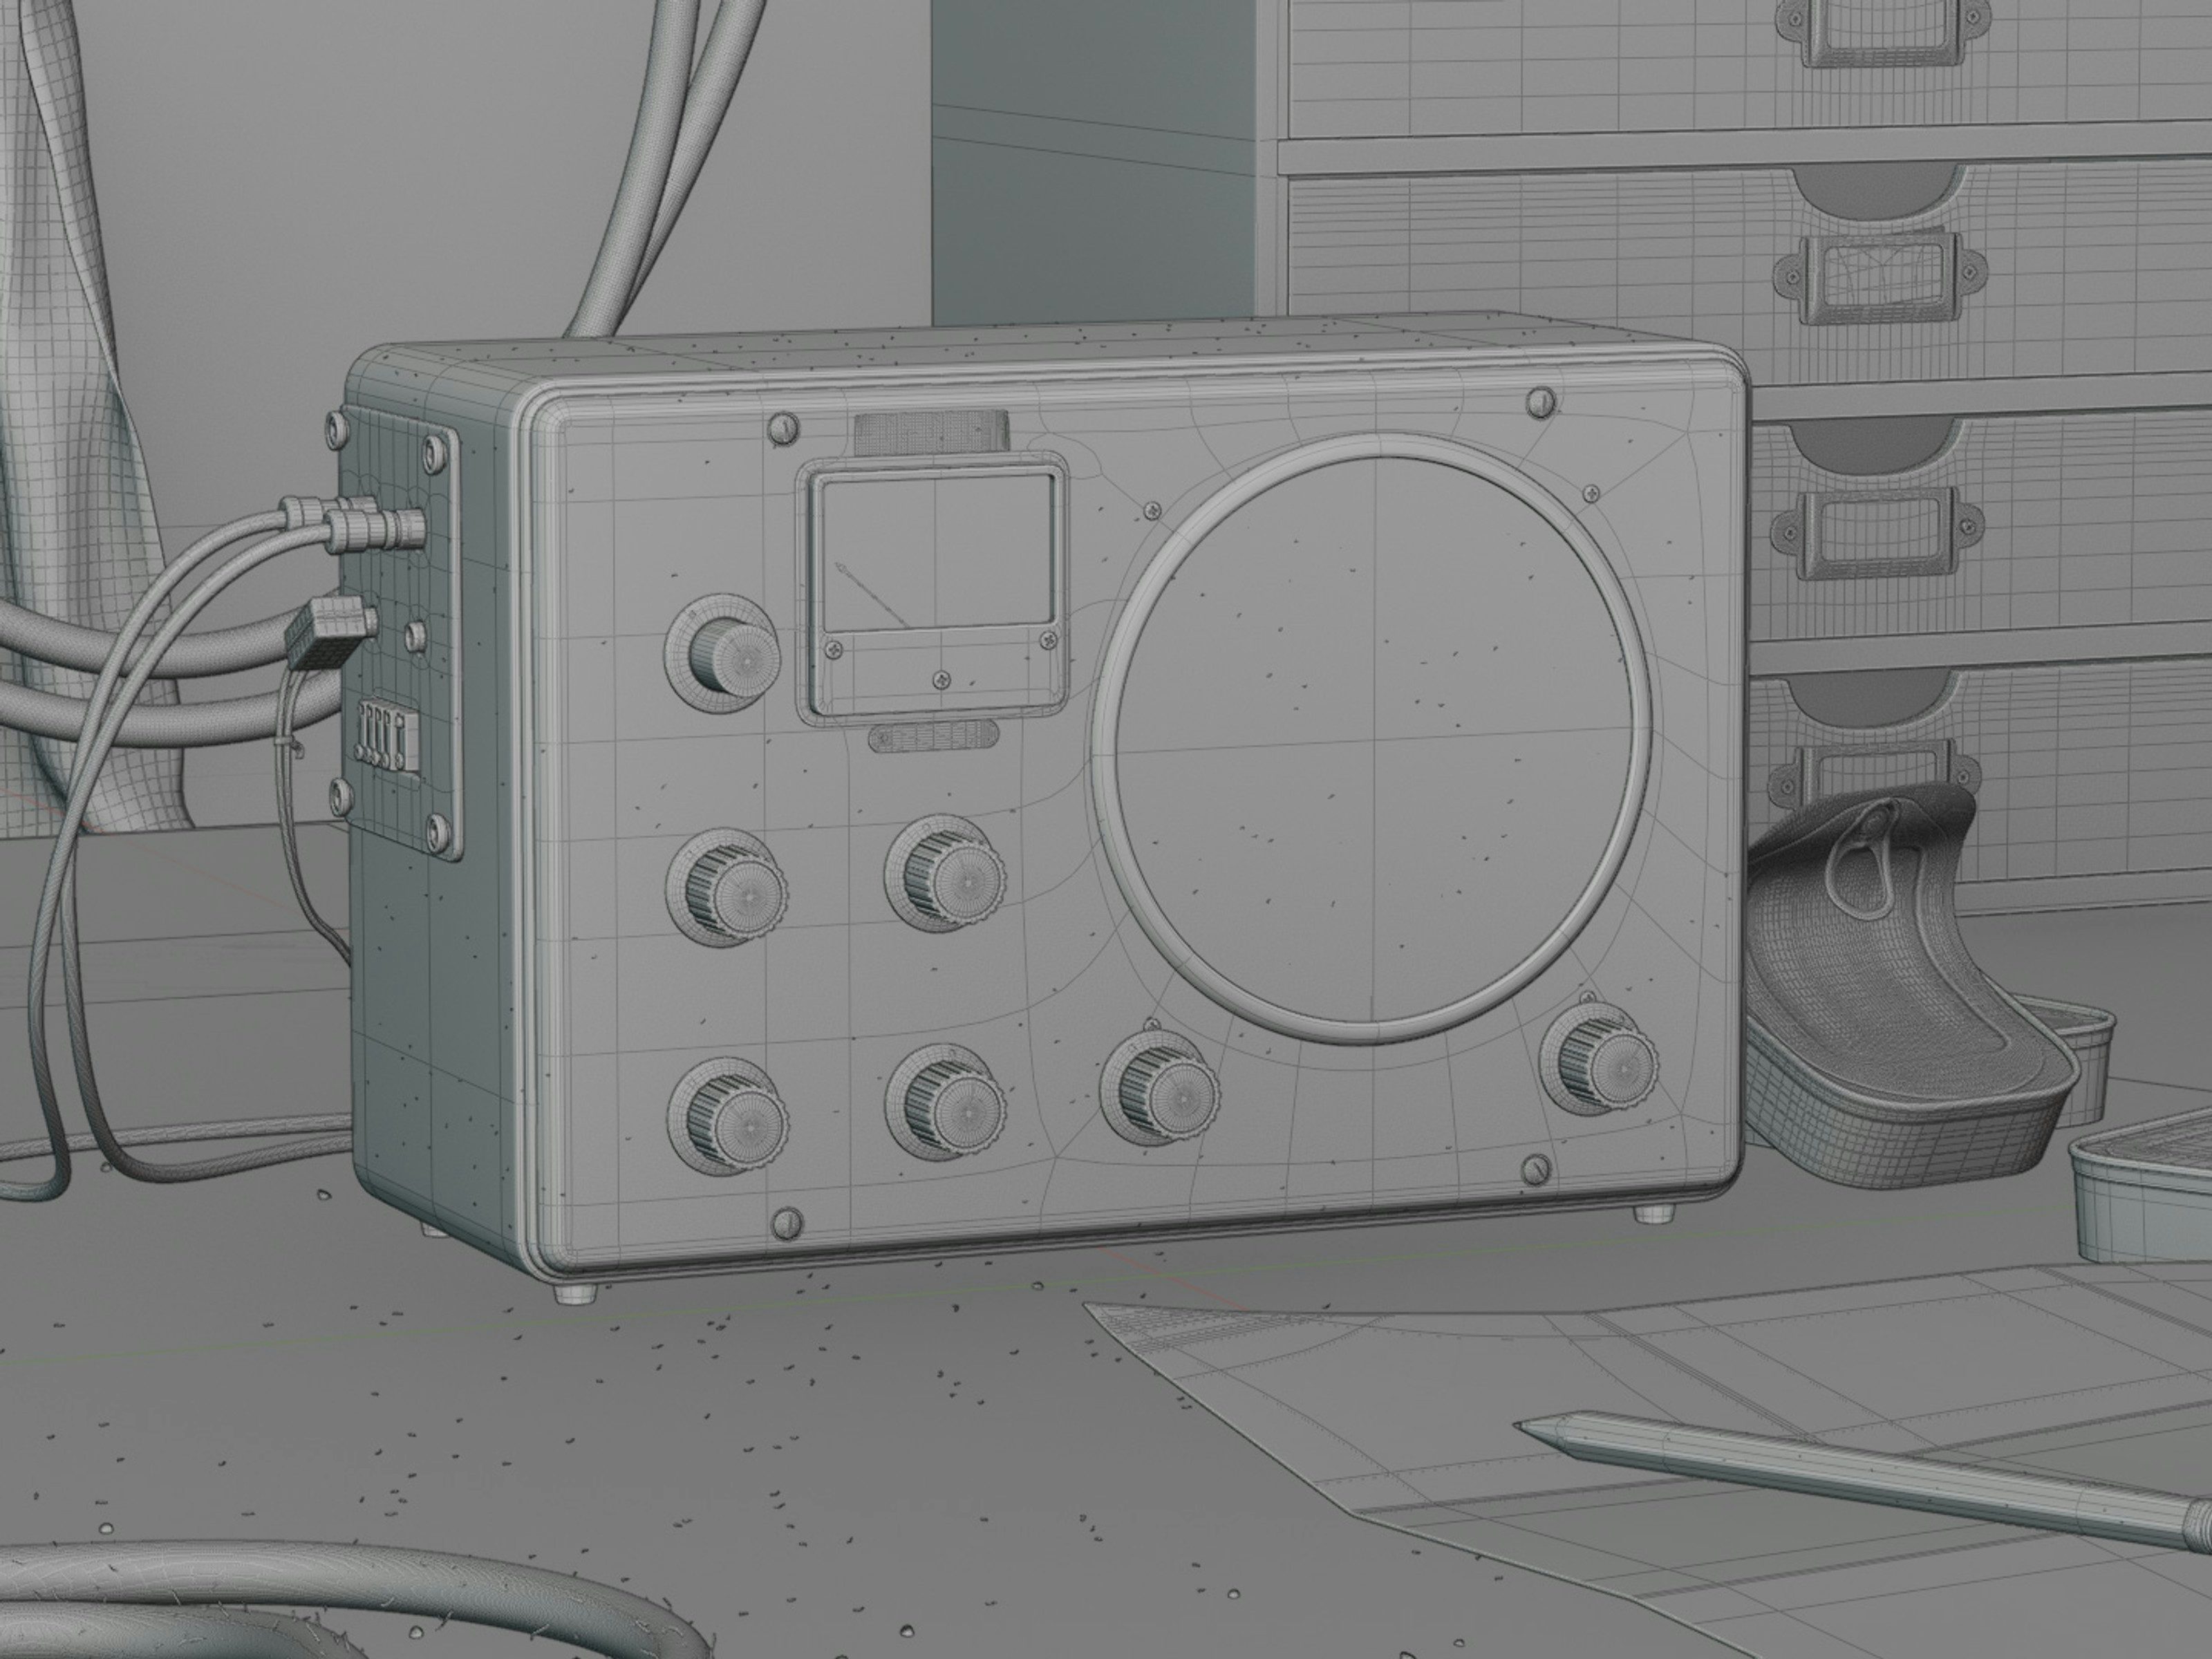 Wireframe of Sailor TS66 radio receiver.